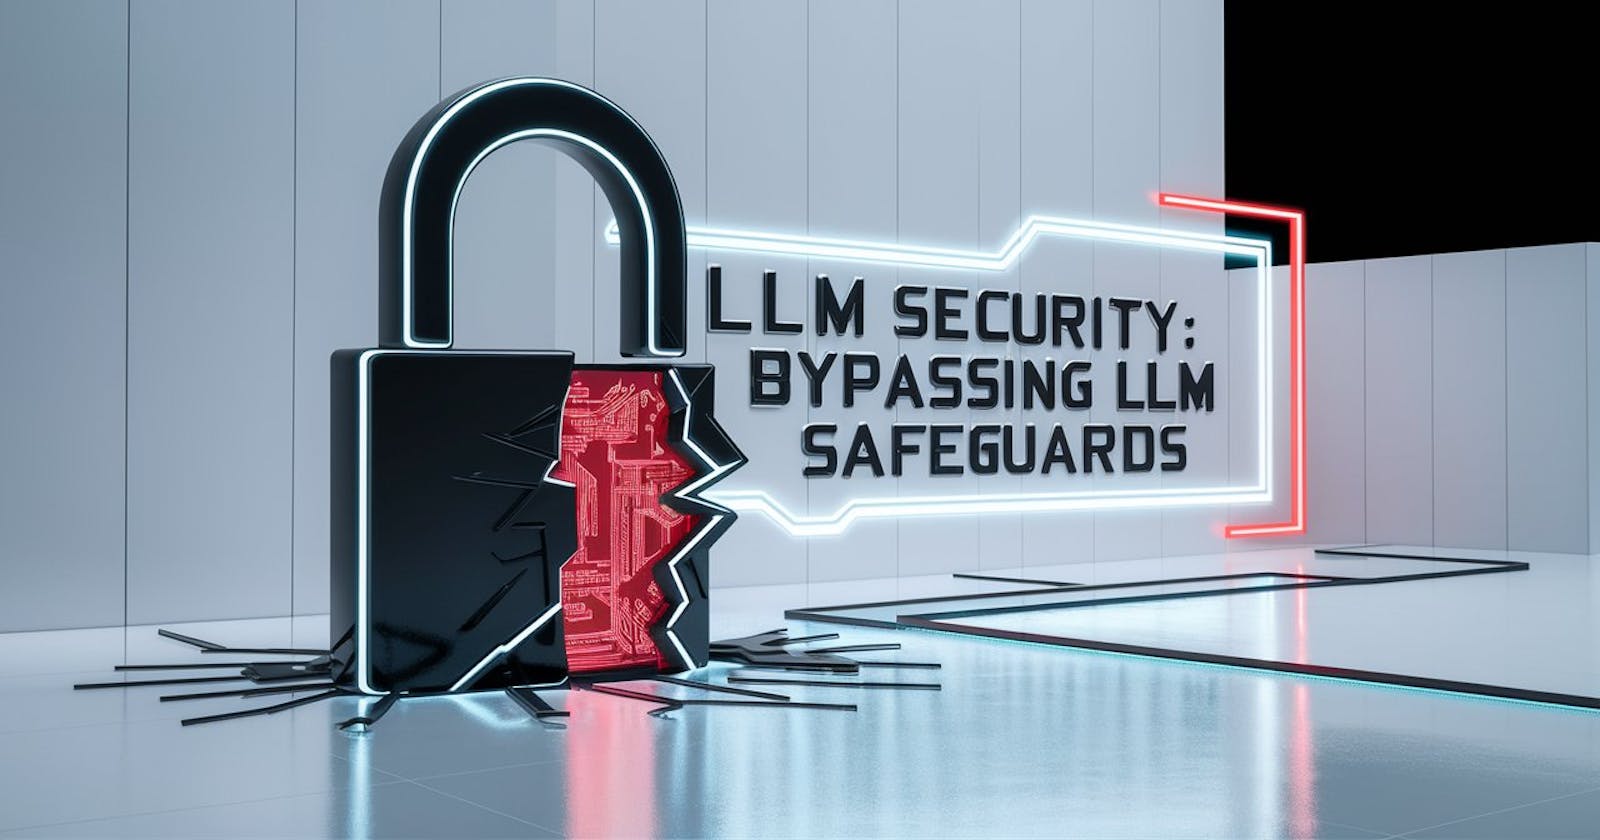 LLM Security: Bypassing LLM Safeguards